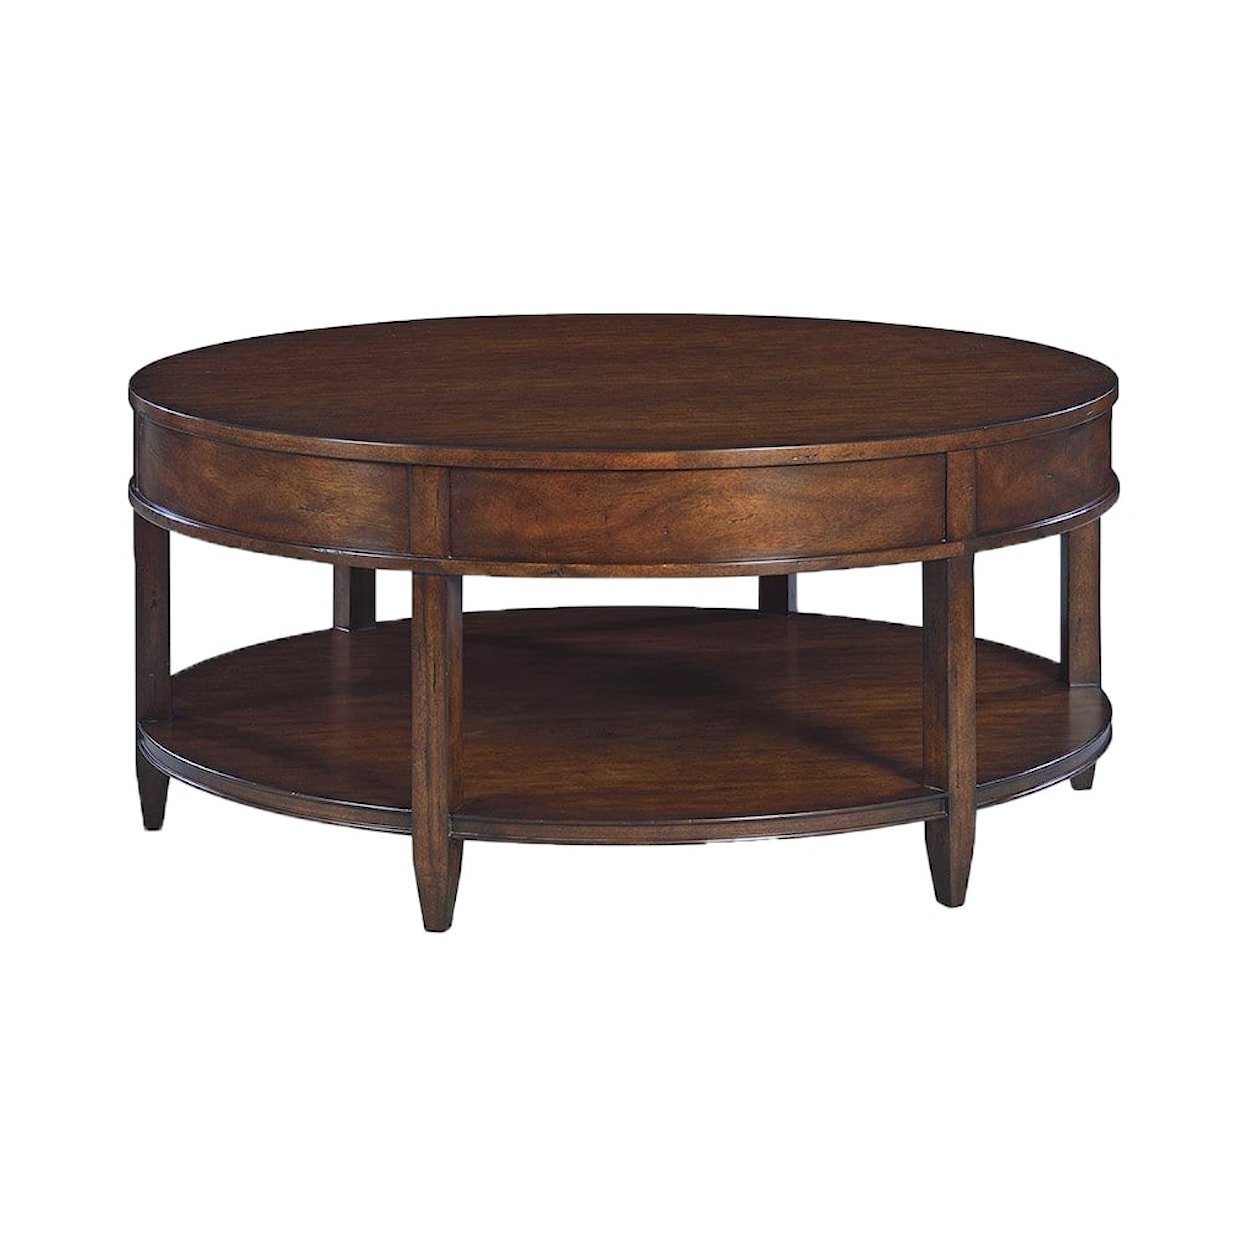 Oliver Home Furnishings Coffee Tables TRADITIONAL ROUND COFFEE TABLE- COUNTRY